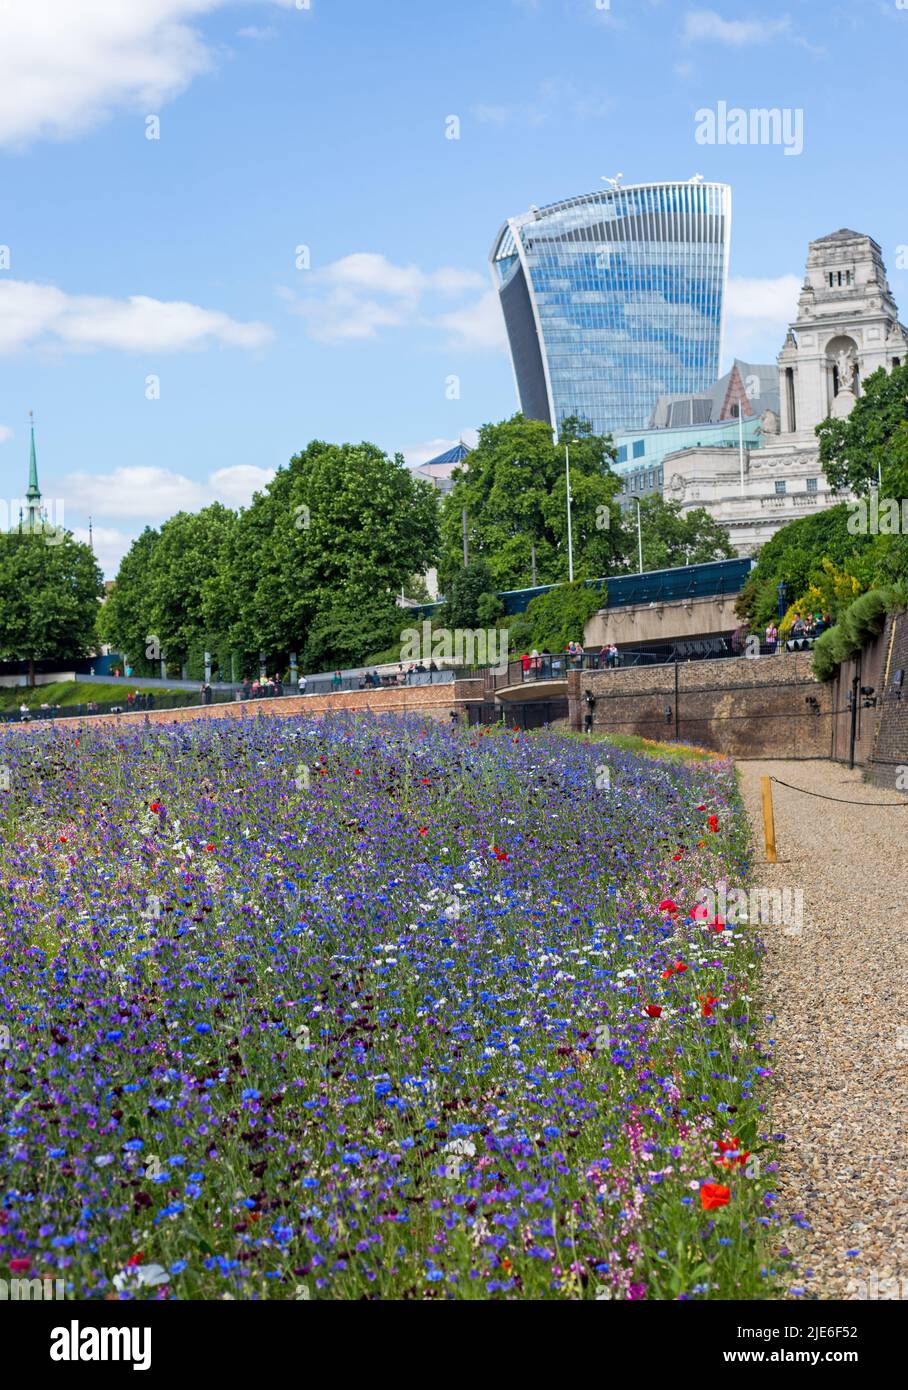 super Bloom, London, 2022. The Tower of London Moat filled with millions of wild flower seeds to encourage wildlife, with various Iconic buildings in Stock Photo